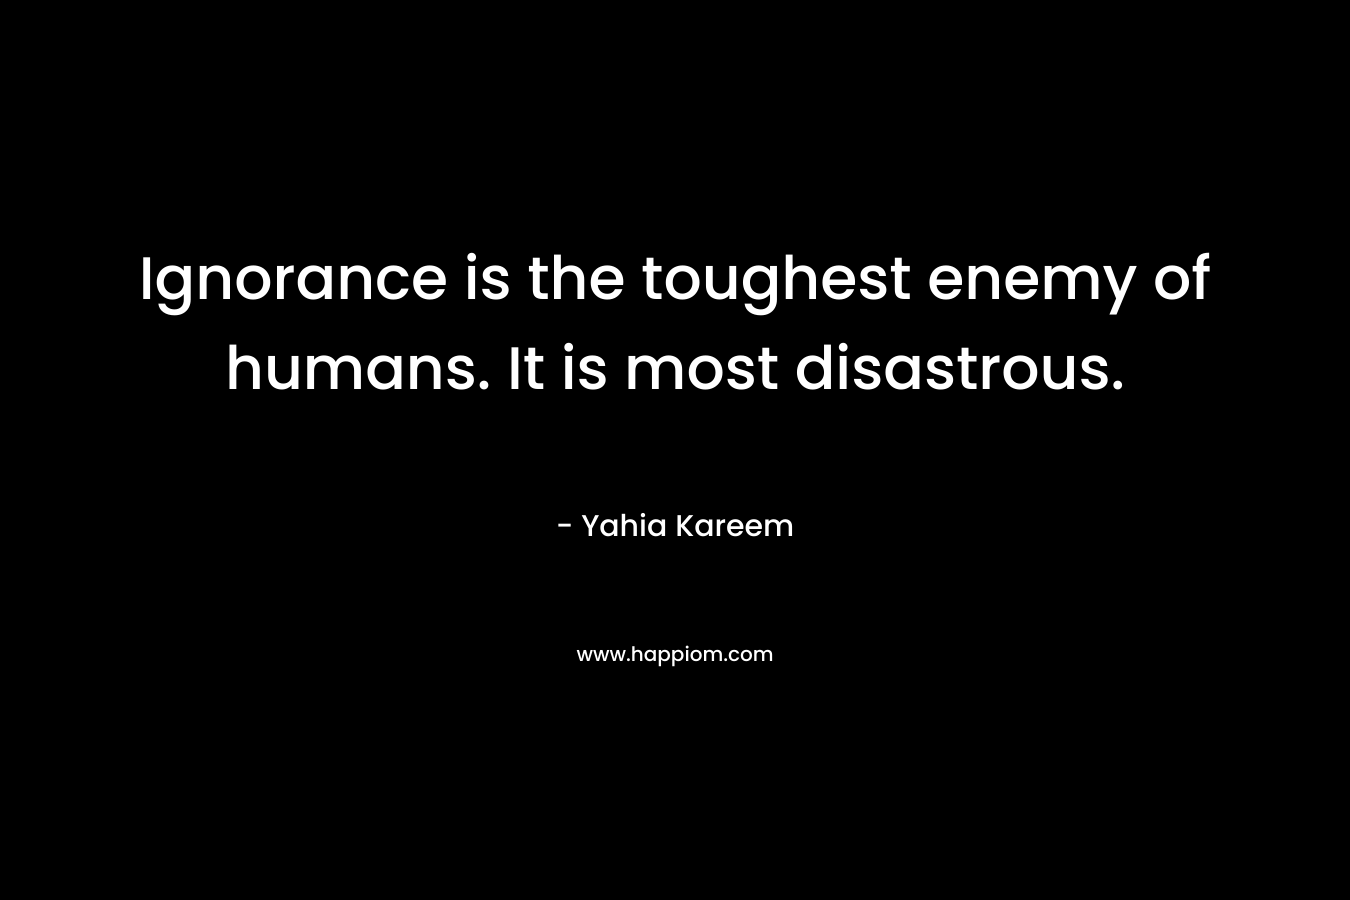 Ignorance is the toughest enemy of humans. It is most disastrous. – Yahia Kareem